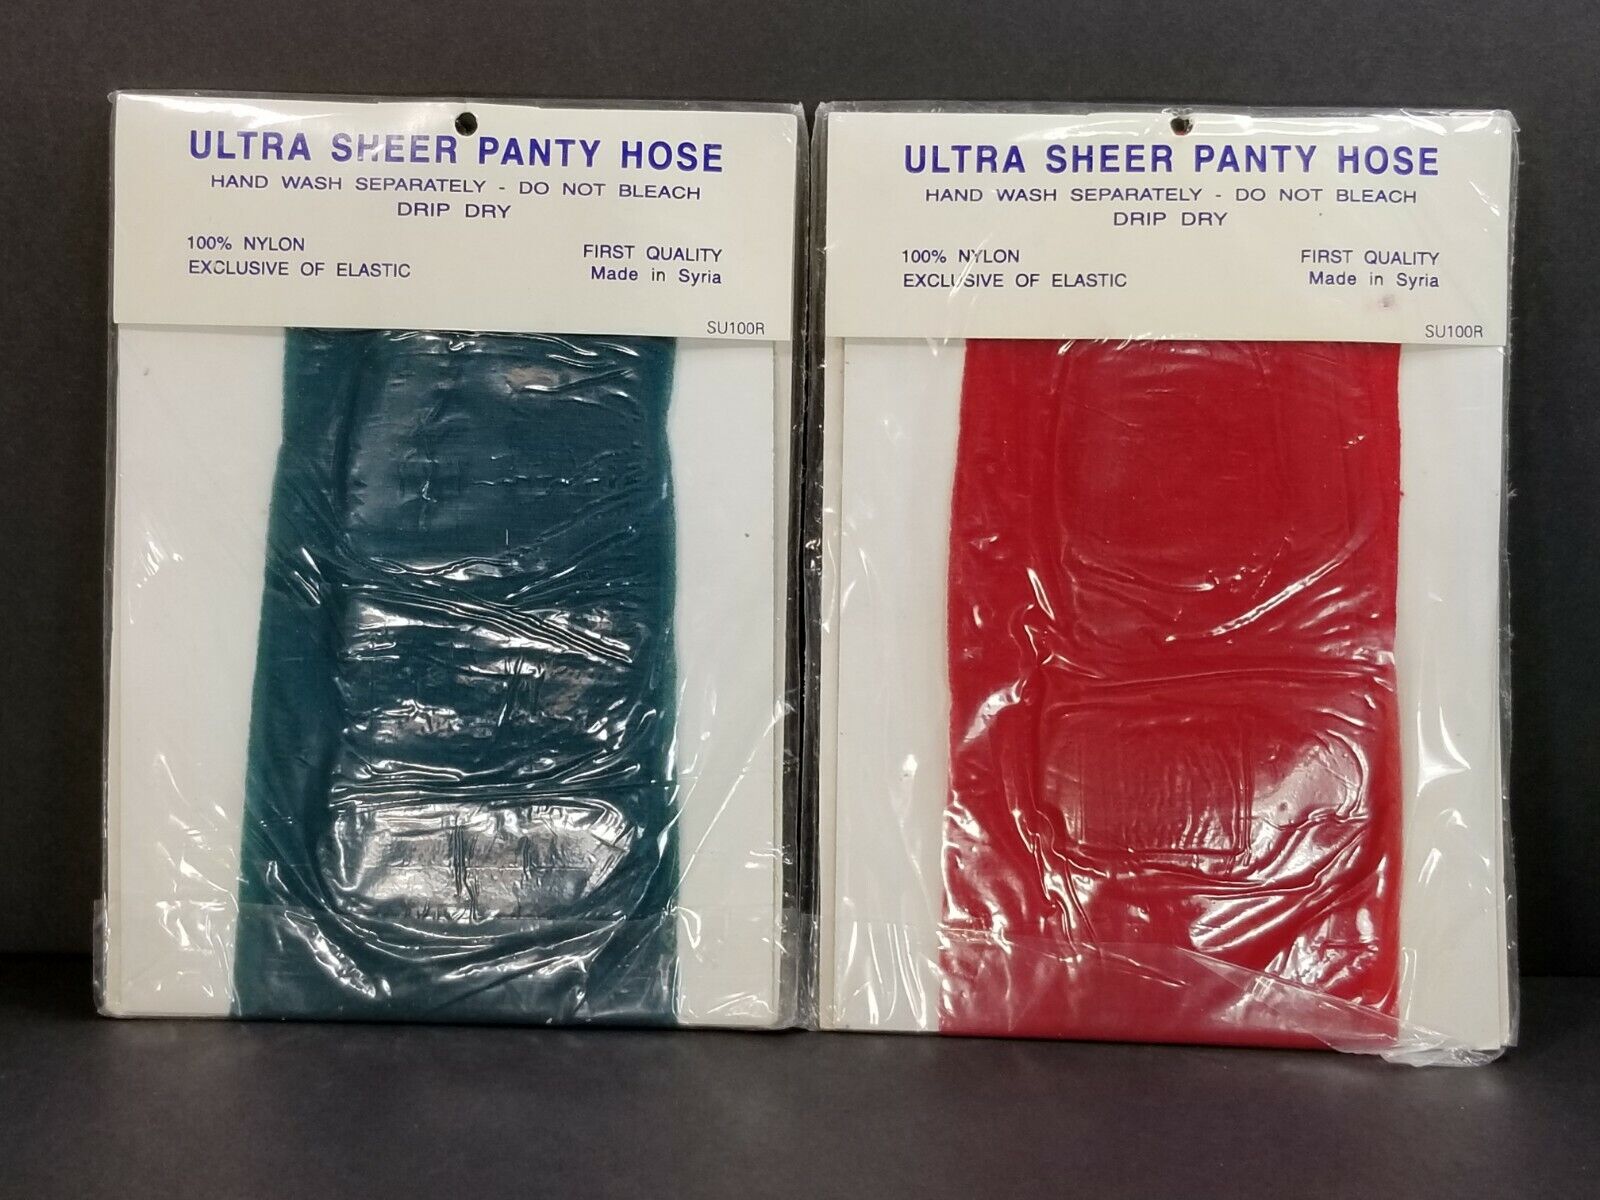 Vintage 80s Lot of 6 Ultra Sheer Panty Hose in Assorted Colors Regular Size 100R Ultra Sheer Does Not Apply - фотография #8